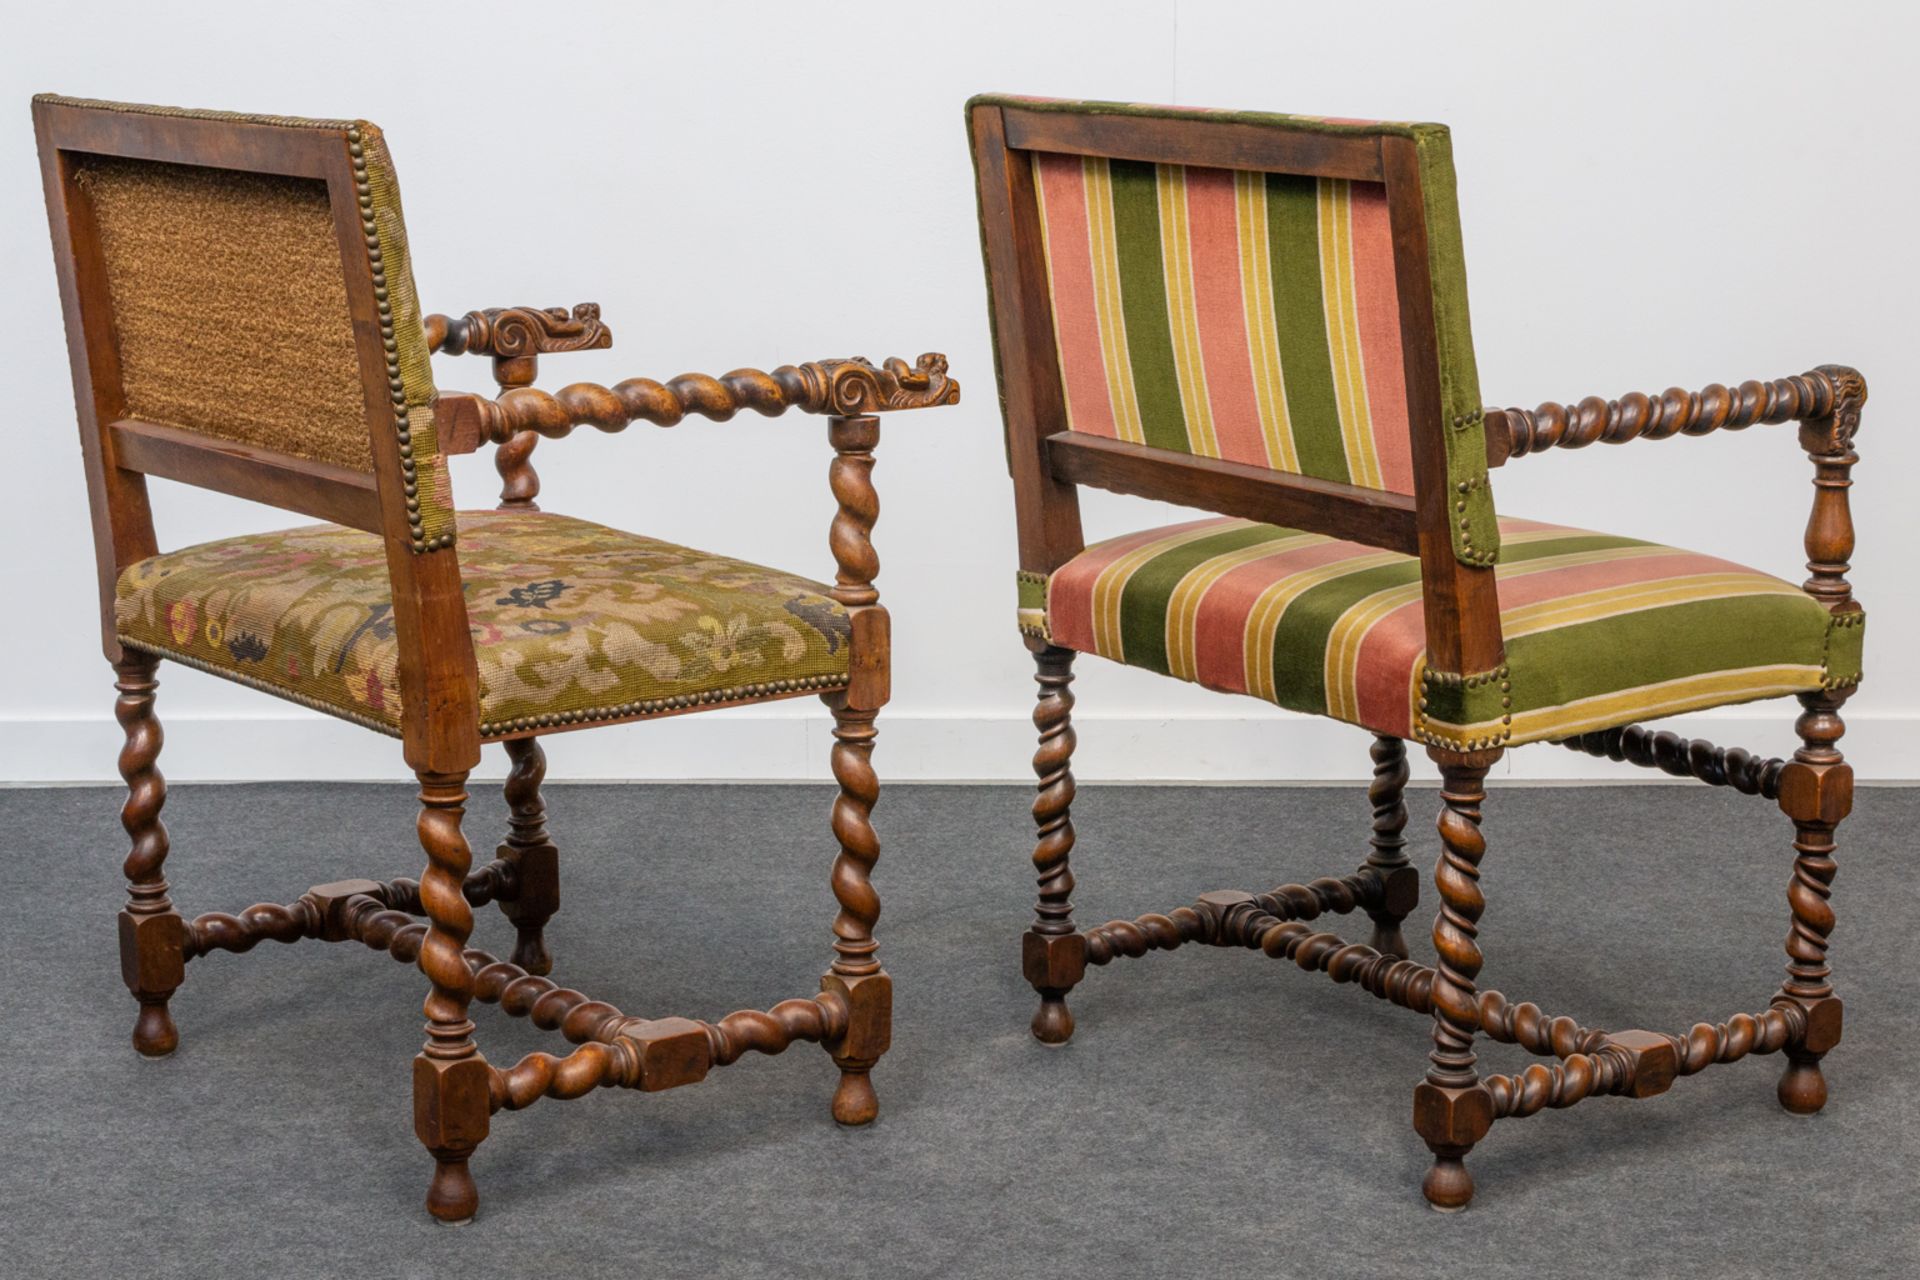 A collection of 2 castle chairs with sculptured handles. 19th century. (92 x 63 x 54 cm) - Bild 15 aus 18